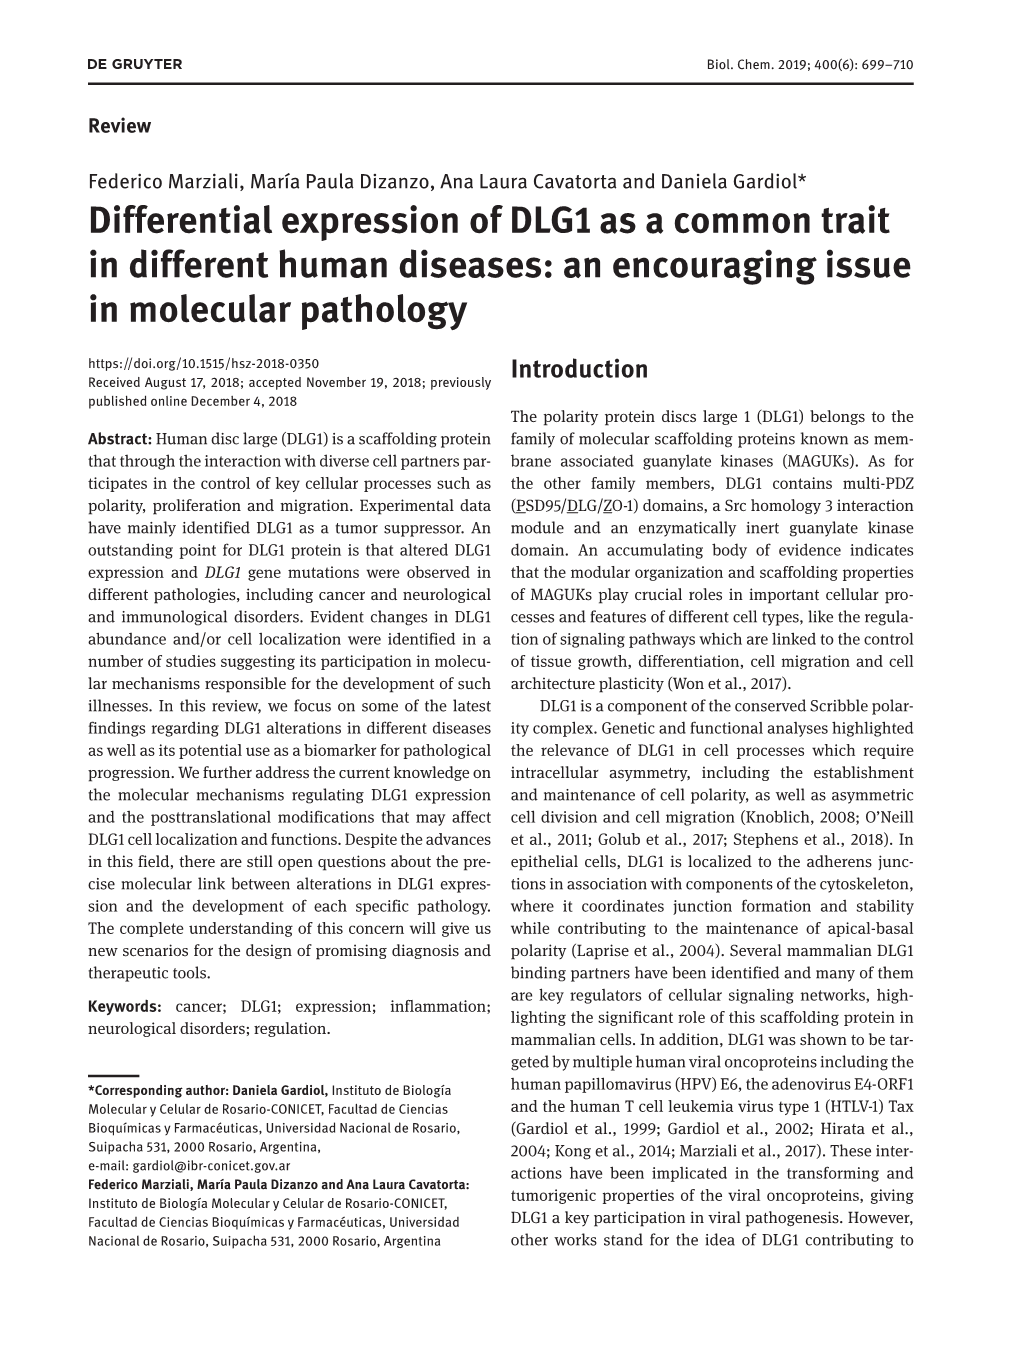 Differential Expression of DLG1 As a Common Trait in Different Human